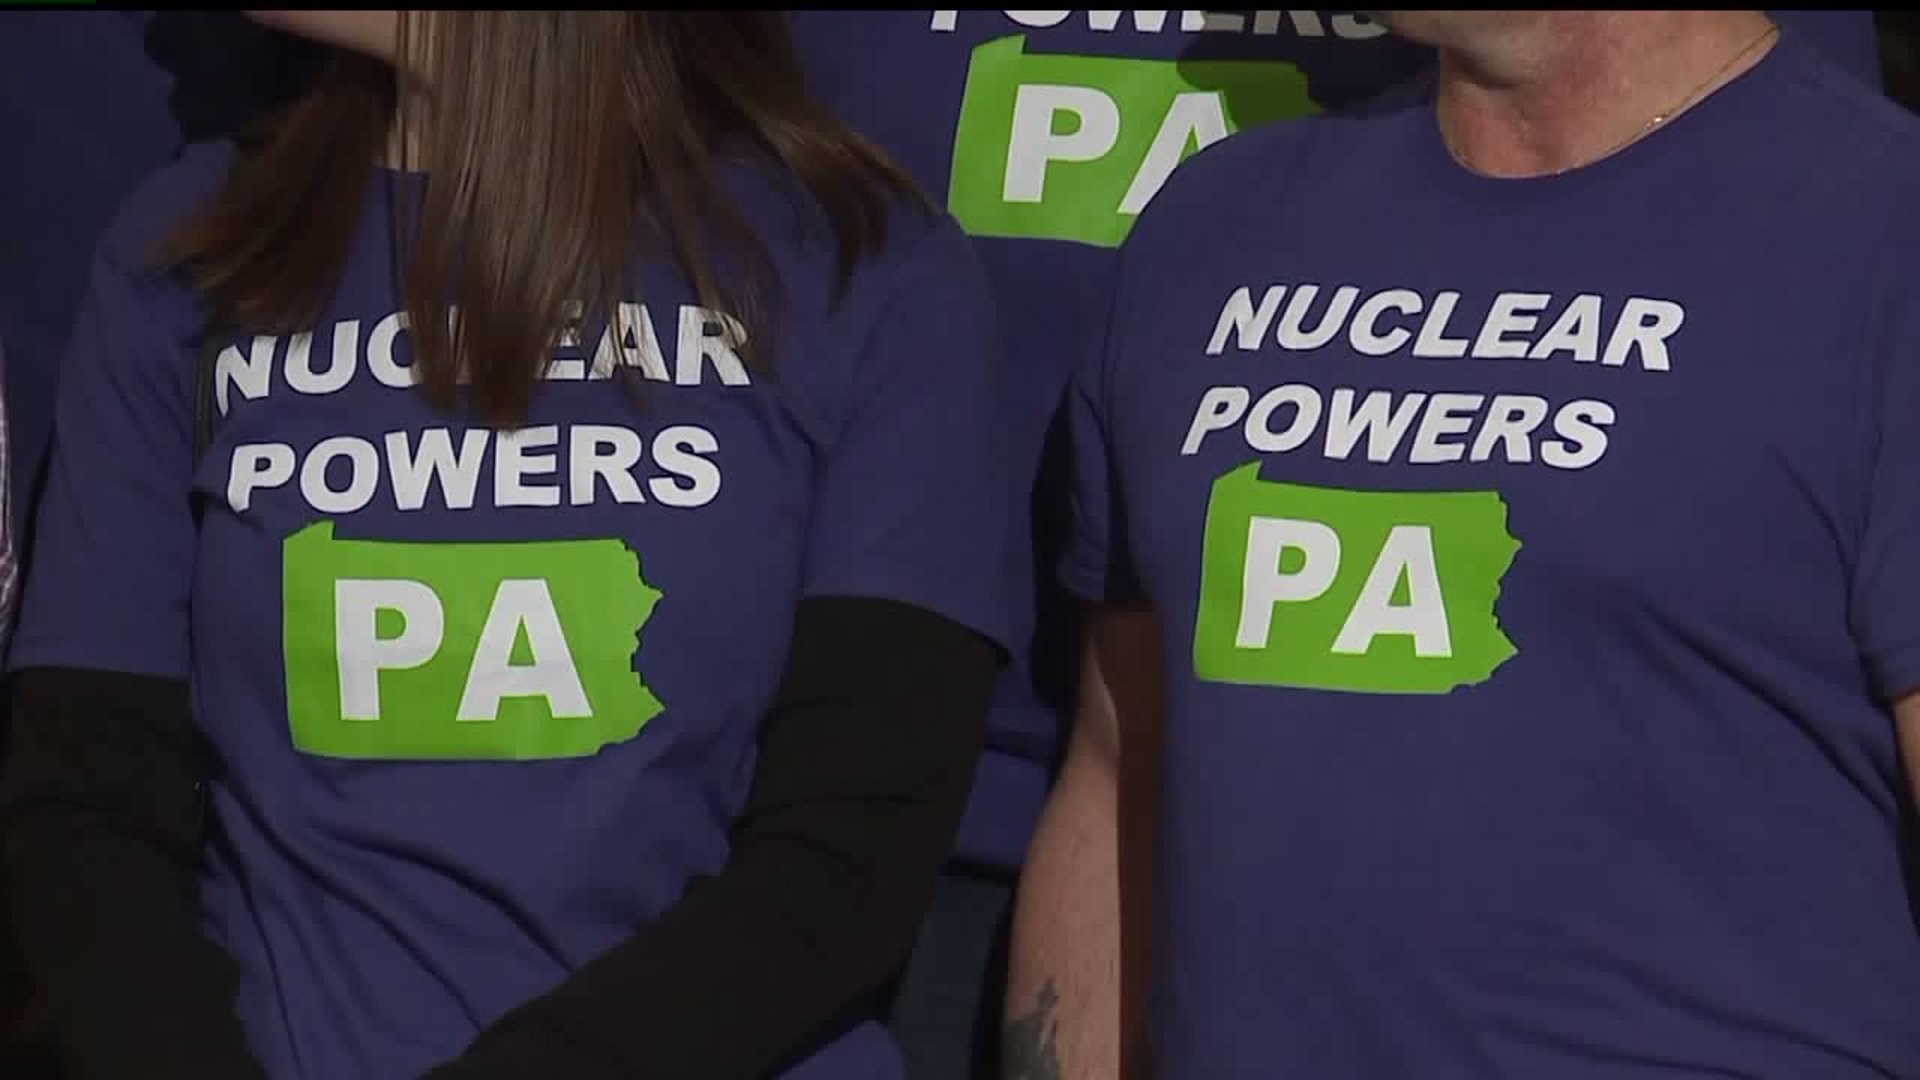 Advocates push for policy to value nuclear